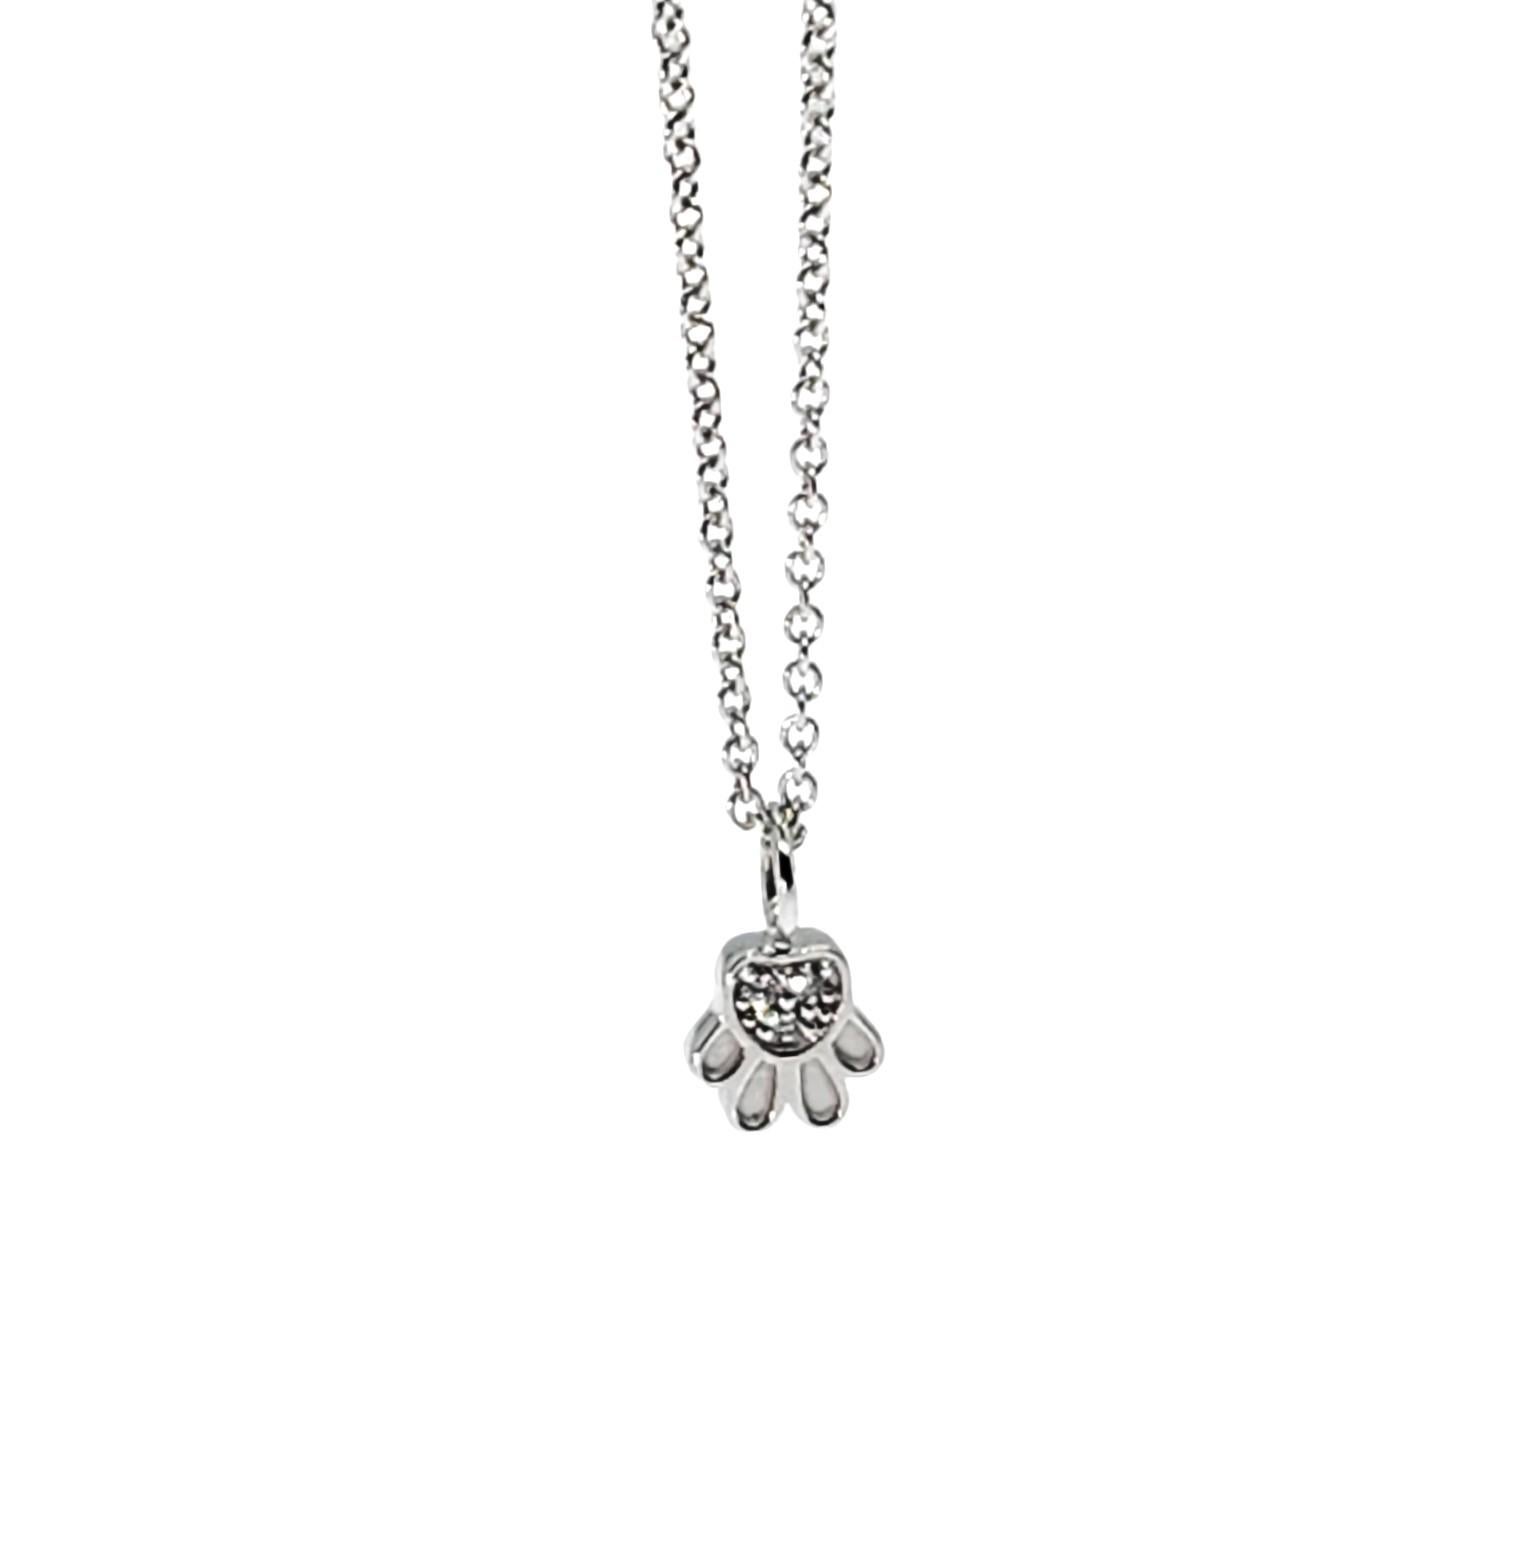 Companion Petite Paw Print Charm Necklace in 14K White Gold and Diamonds In New Condition For Sale In Rutherford, NJ